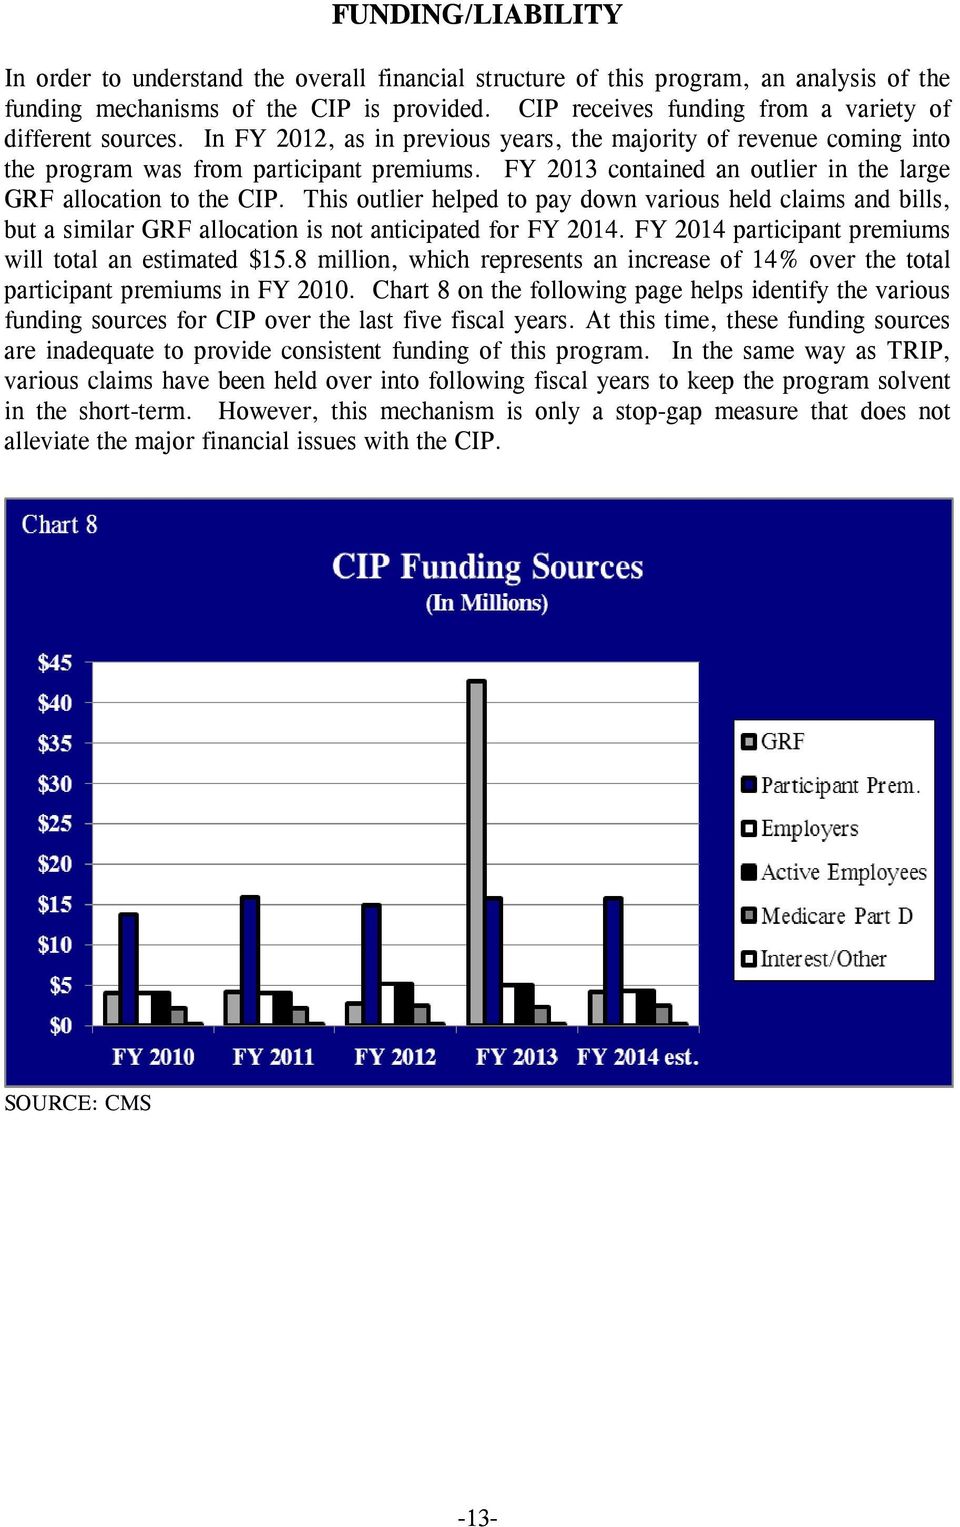 FY 2013 contained an outlier in the large GRF allocation to the CIP. This outlier helped to pay down various held claims and bills, but a similar GRF allocation is not anticipated for FY 2014.